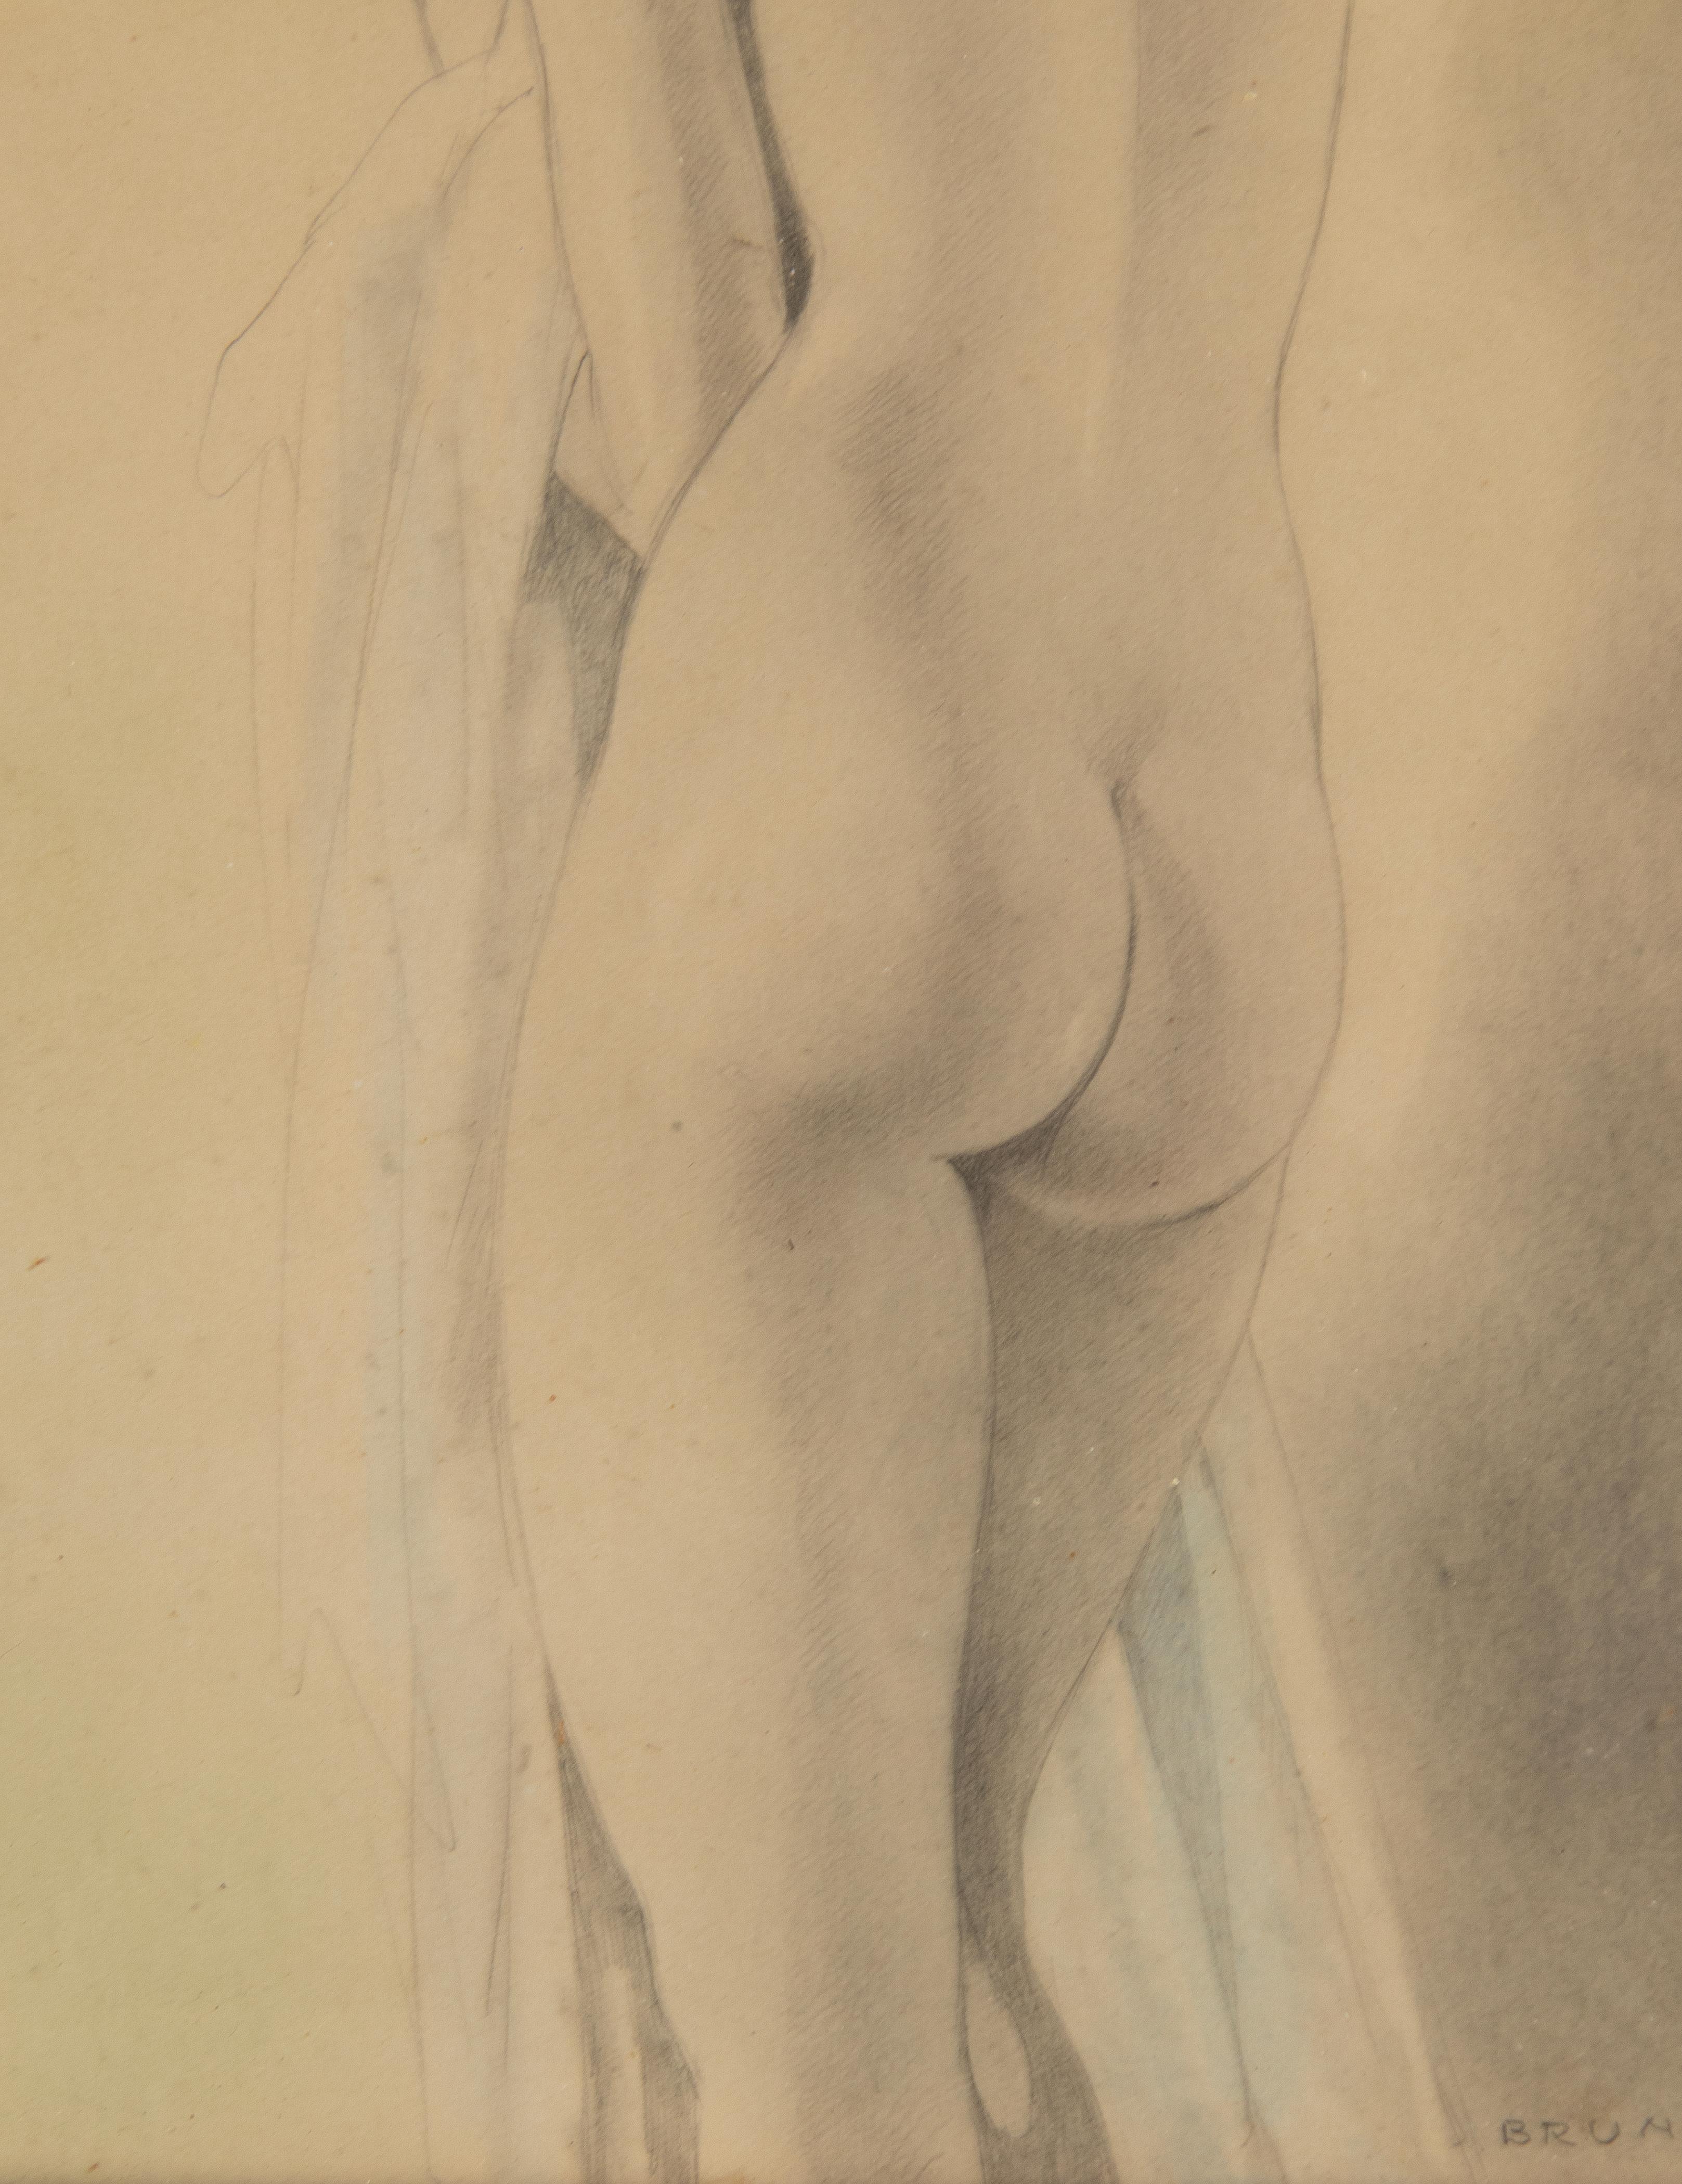 Pair of Art Deco Period Erotic Drawings / Watercolours by Umberto Brunelleschi For Sale 6